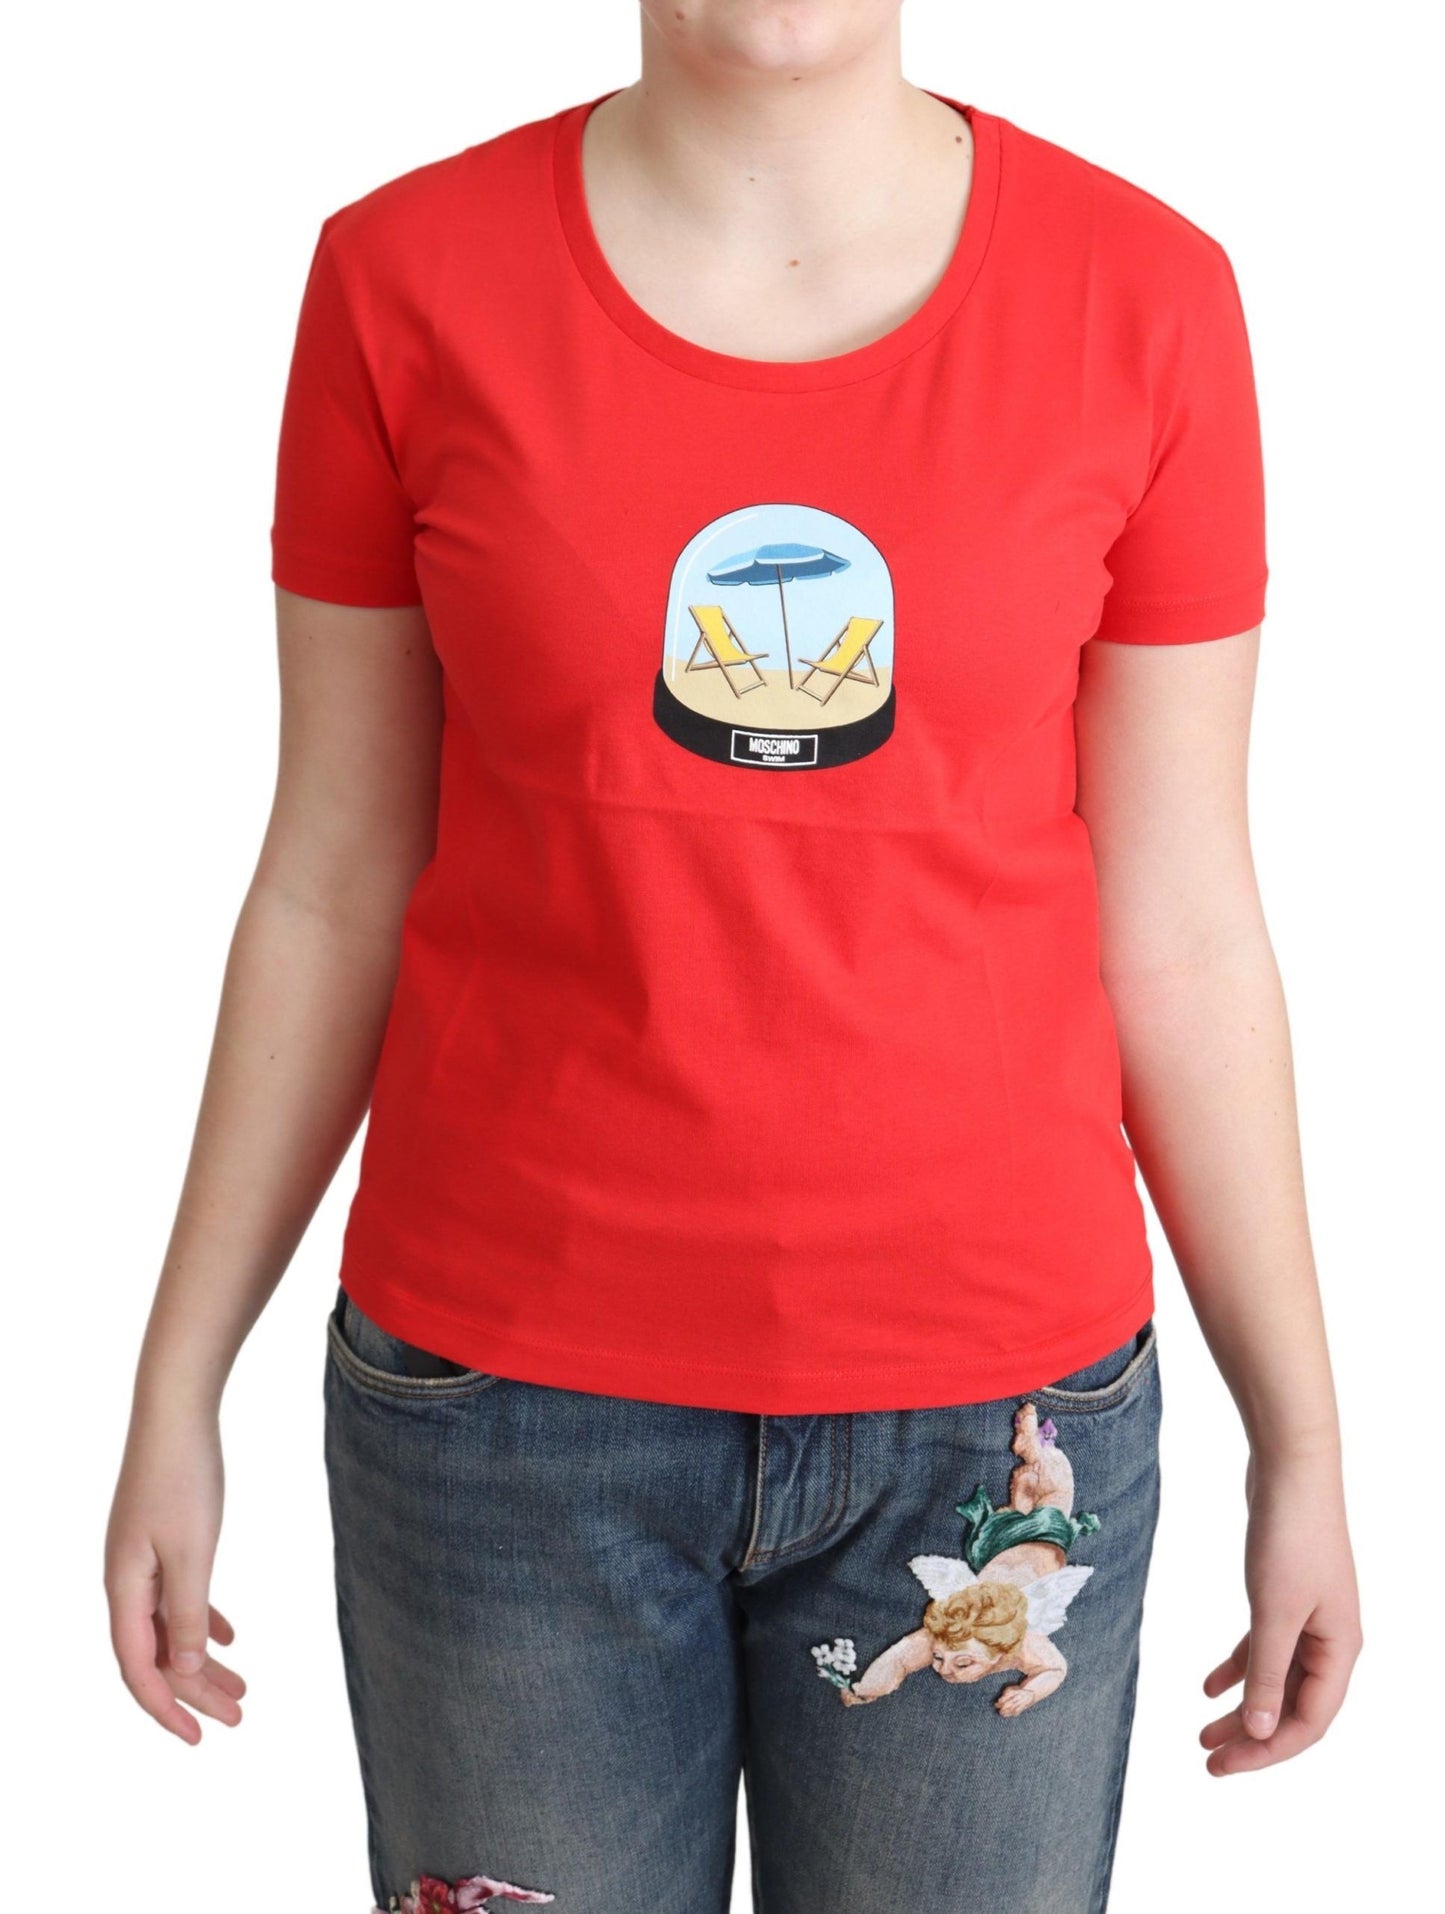 Chic Red Cotton Tee with Signature Print